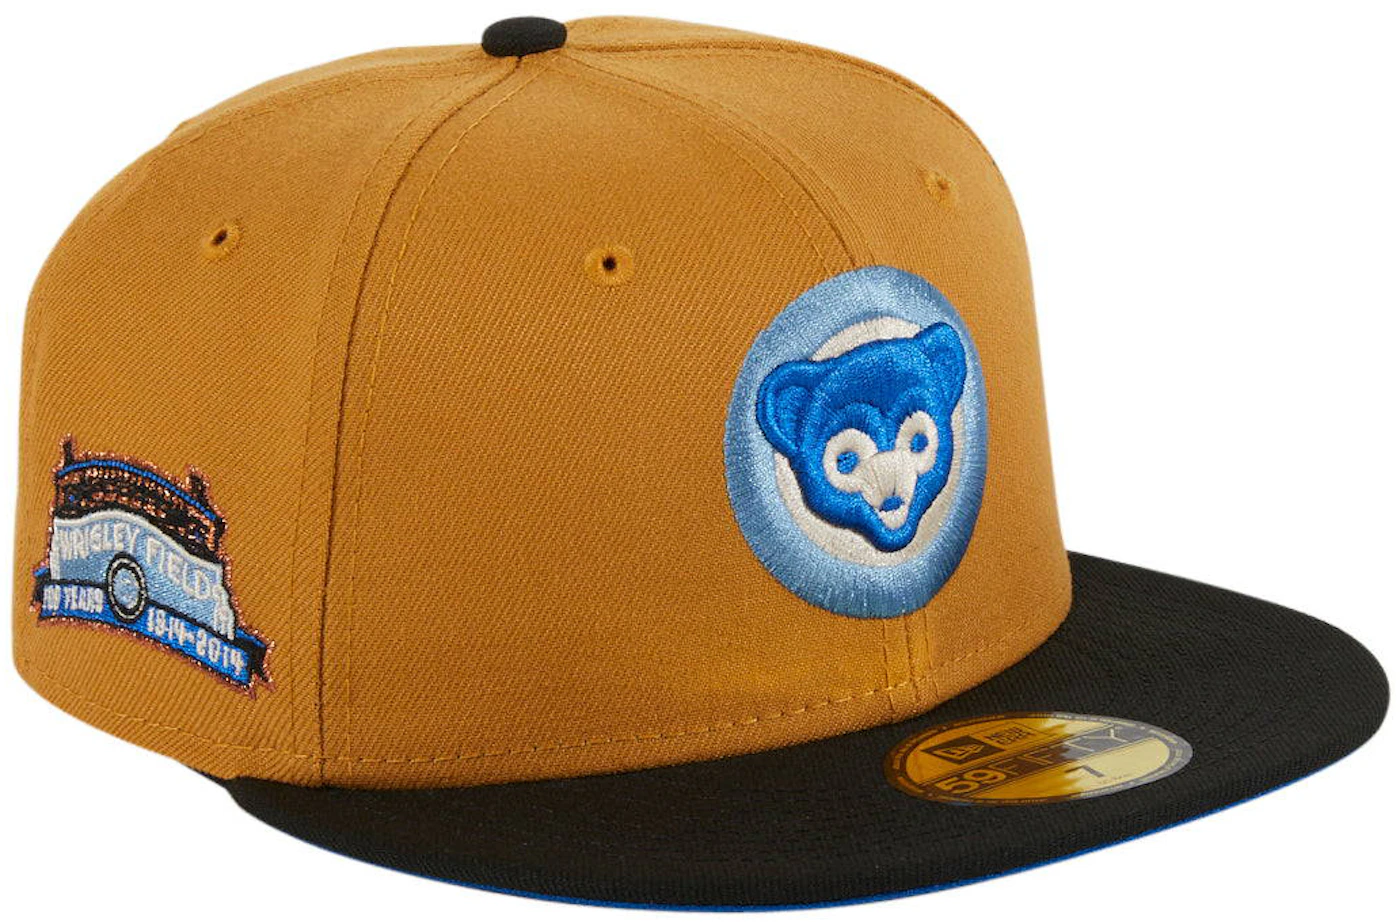 New Era Chicago Cubs Ancient Egypt 70's Logo Wrigley 100th Anniversary Hat Club Exclusive 59FIFTY Fitted Hat Khaki/Black/Royal Blue